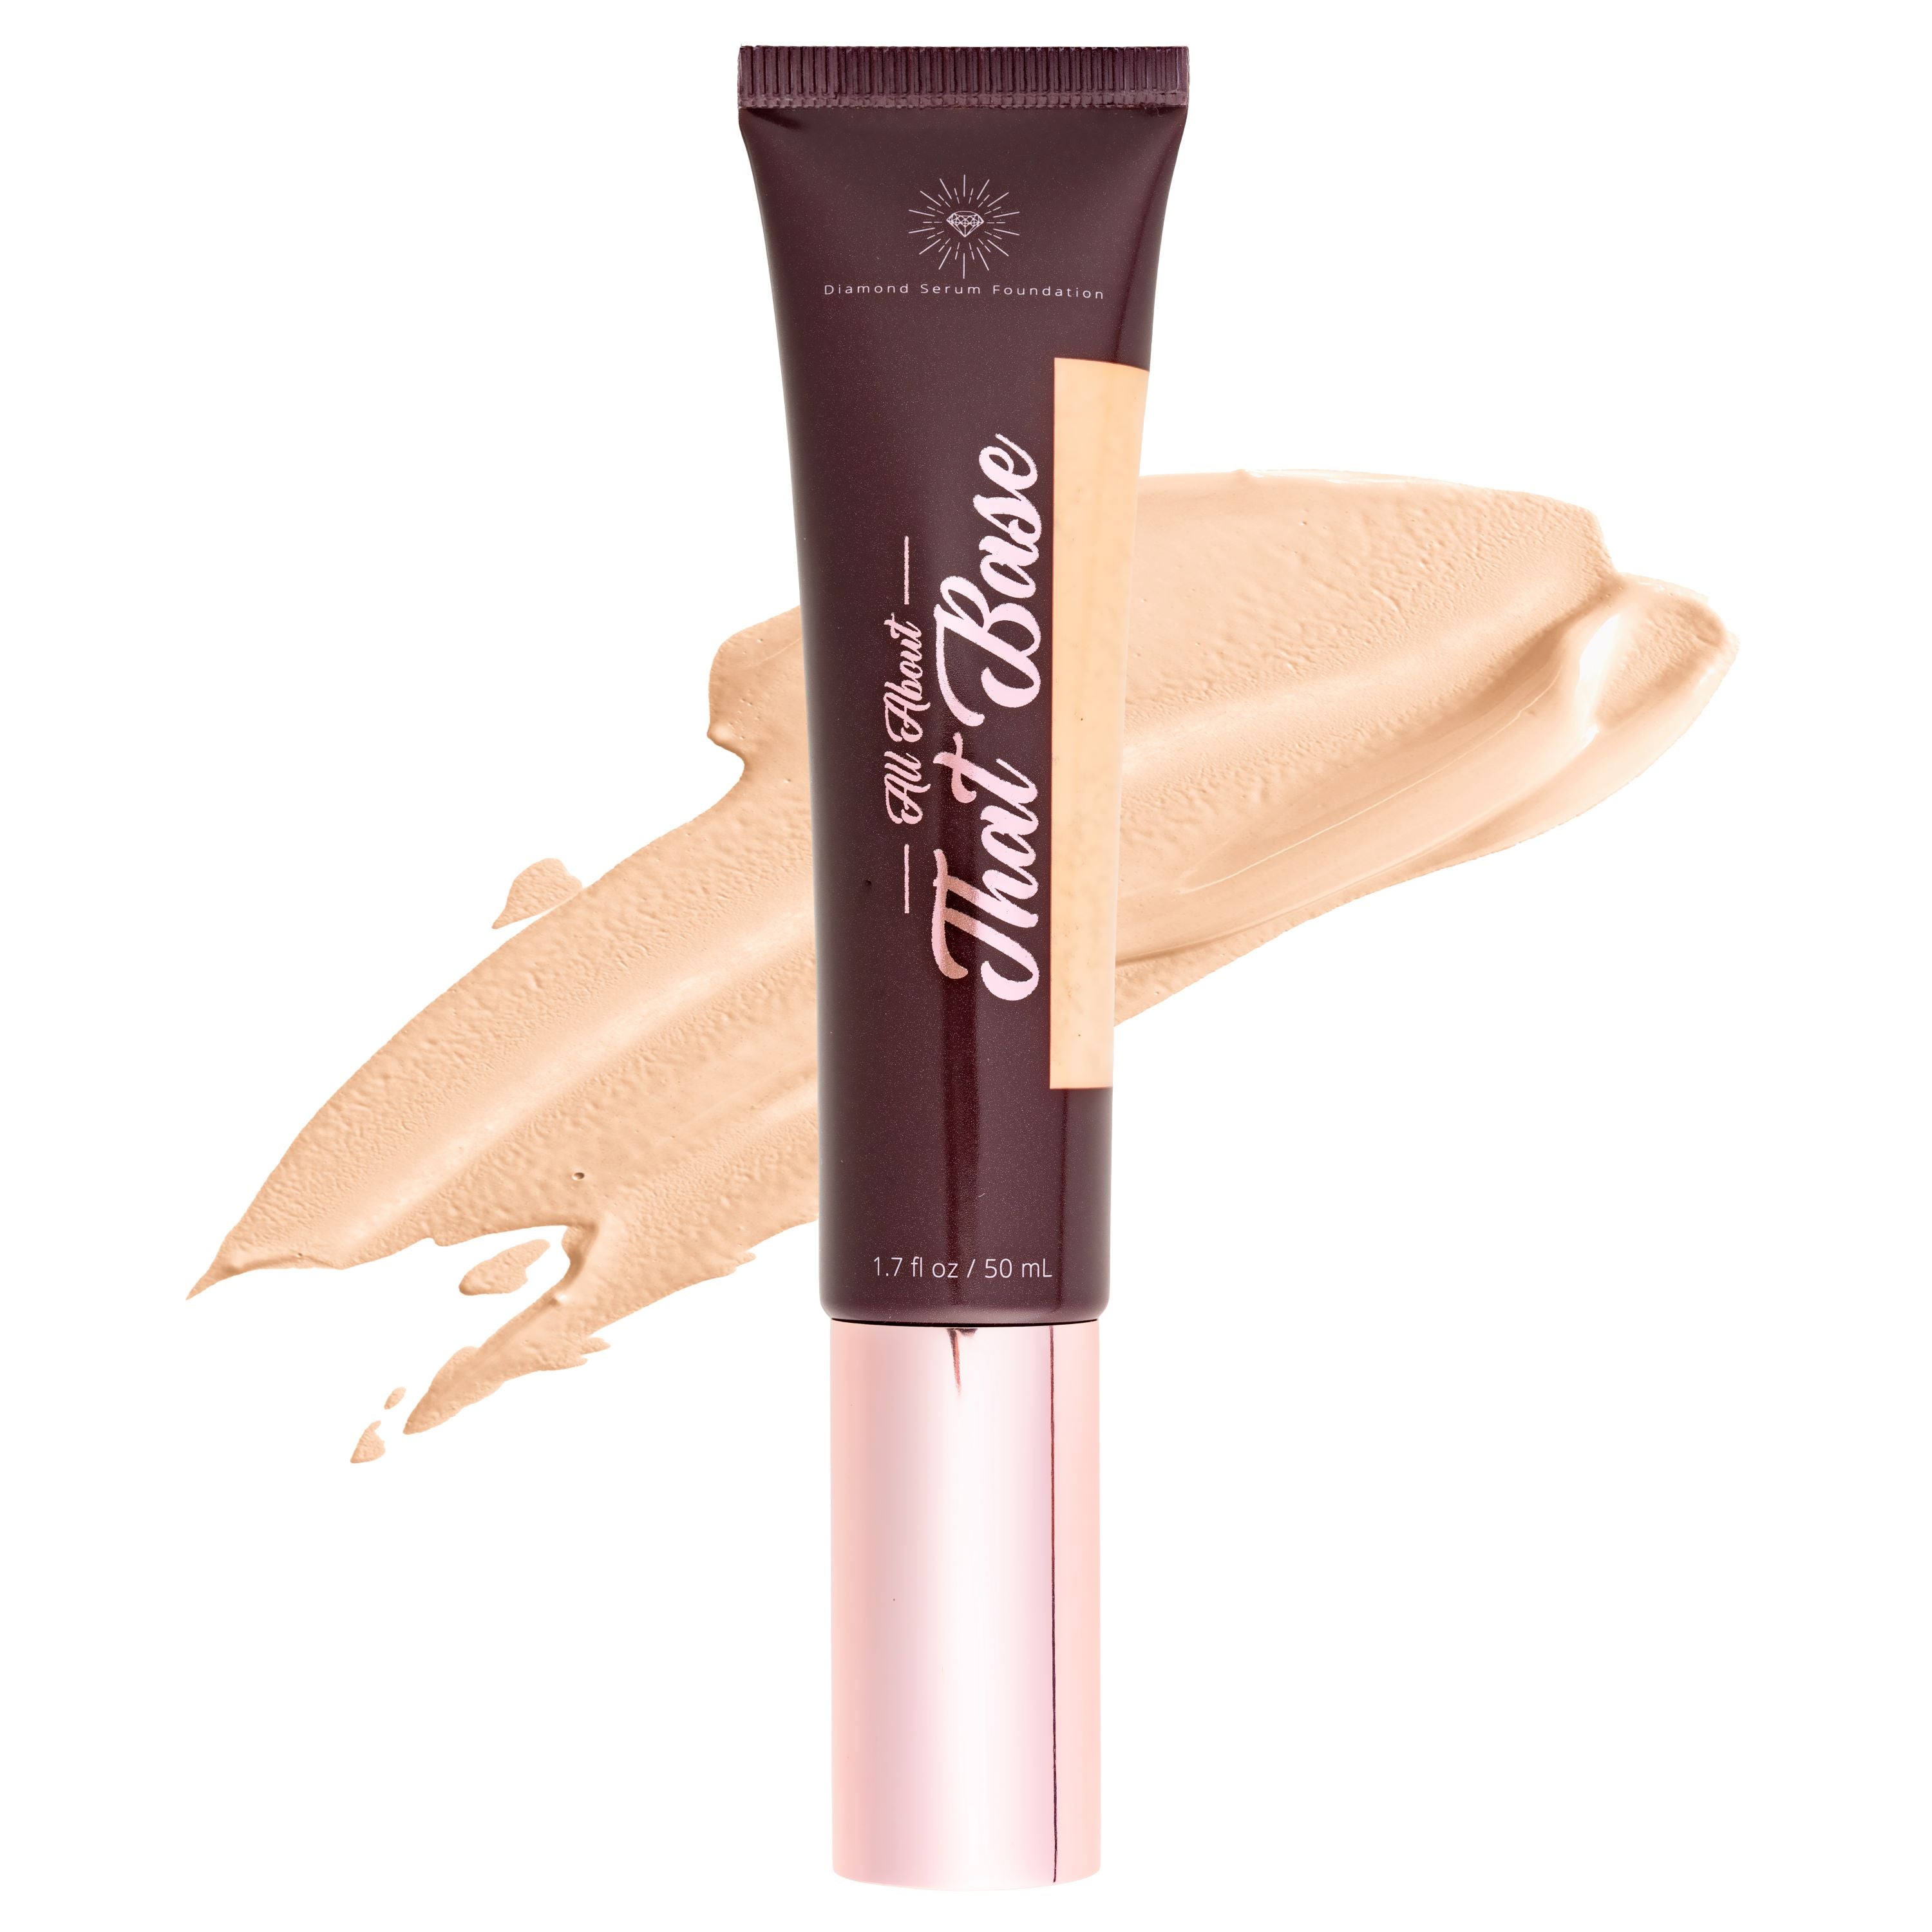 Hover Cover Hi-Definition Full-Coverage Foundation® – Belle Beauty